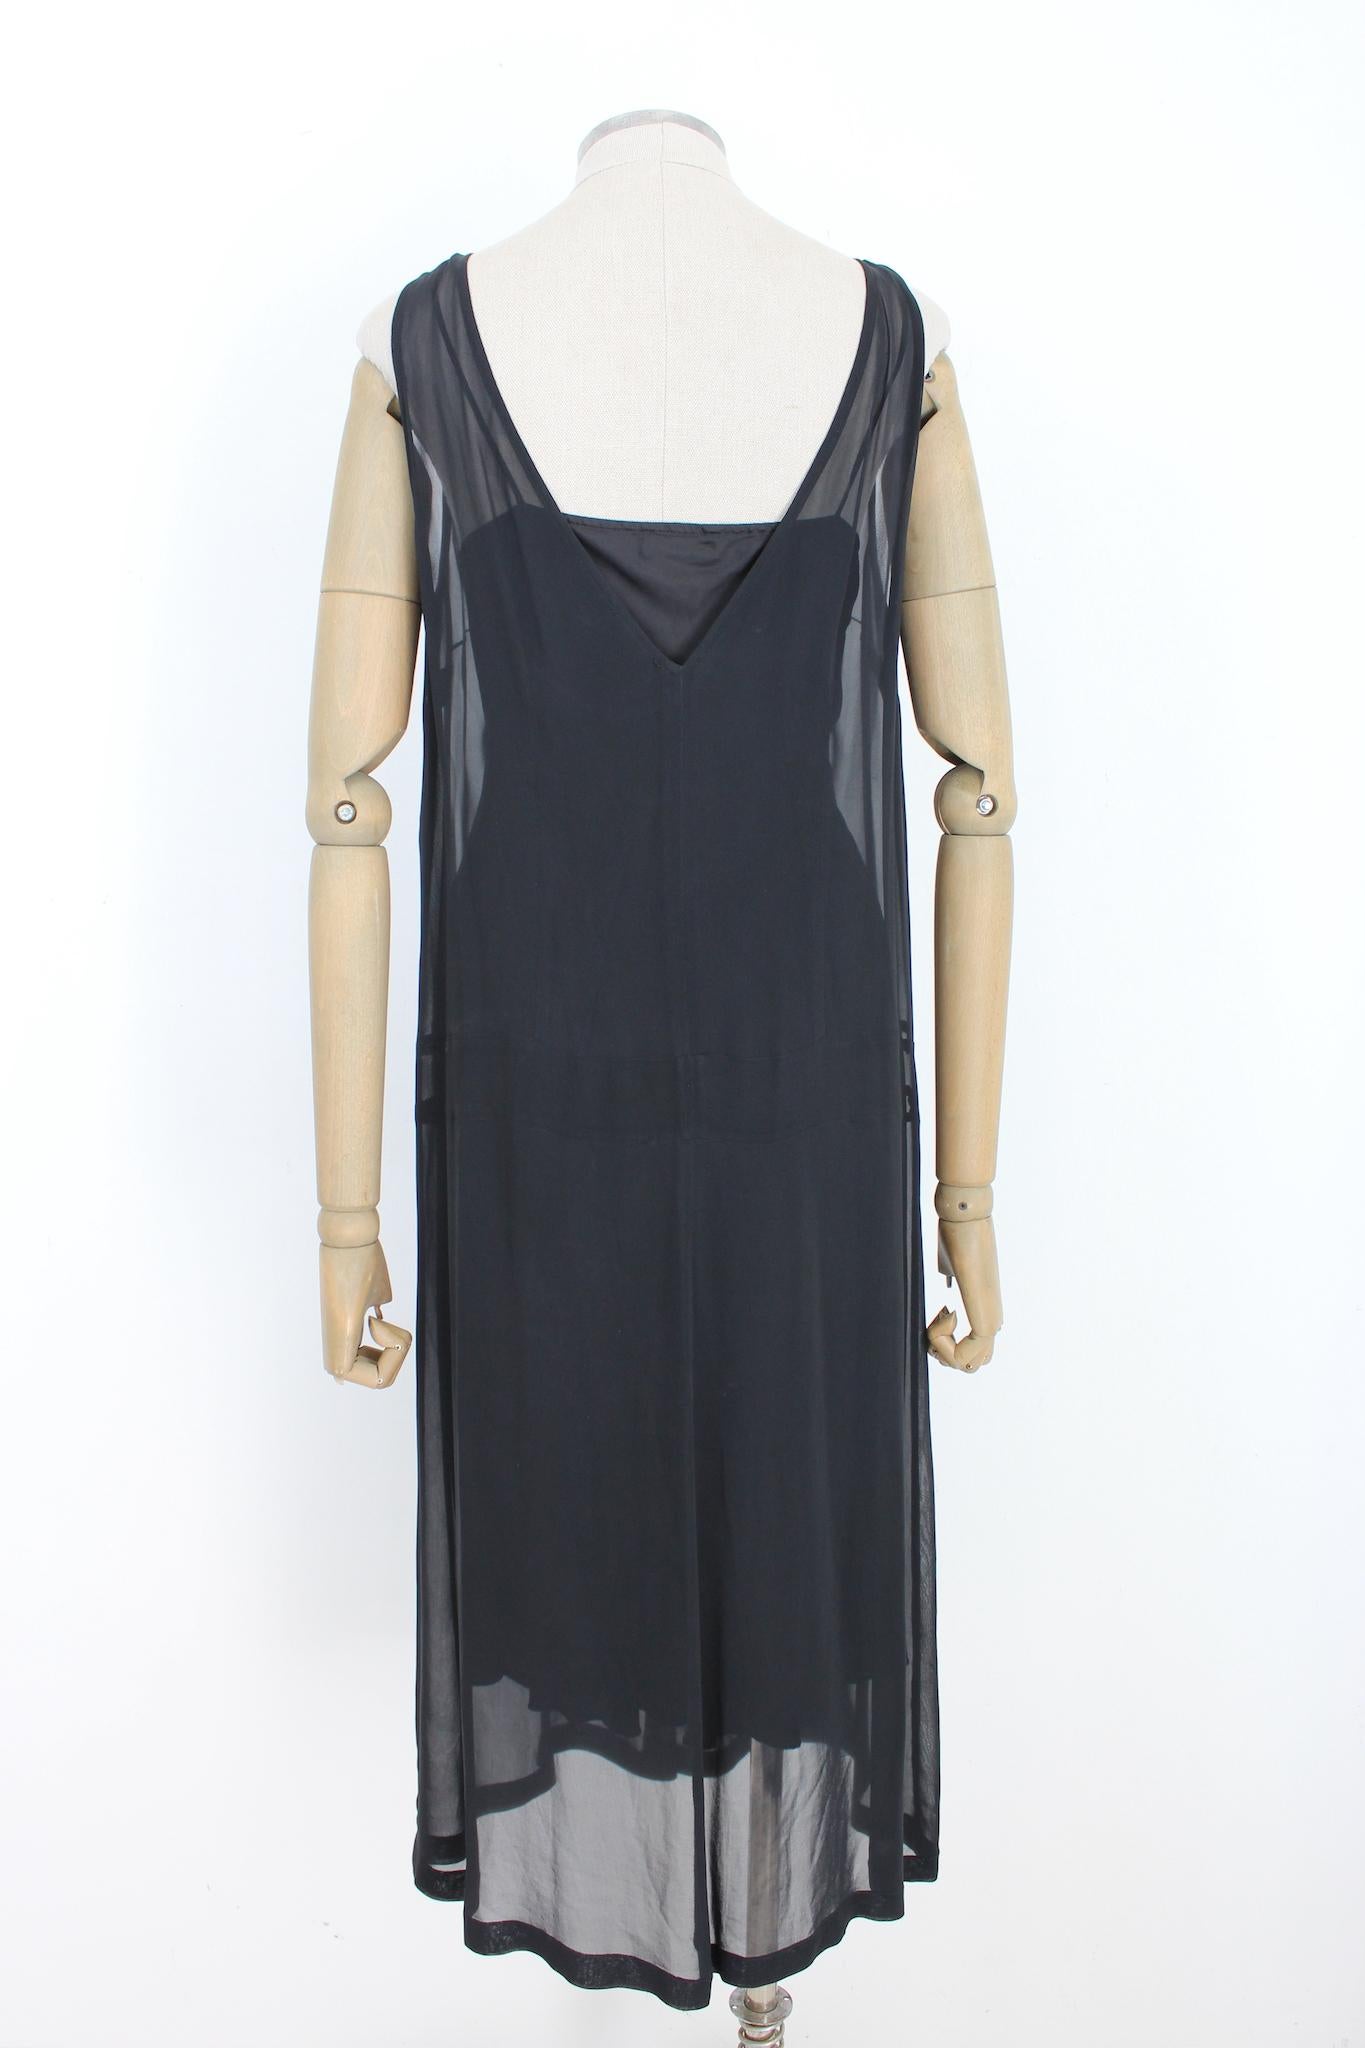 Dries Van Noten vintage 90s long evening dress. Transparent tunic dress with slip, black, sleeveless and v-neckline. Small drapery on one side. Silk fabric. Made in Belgium.

Size: 42 It 8 Us 10 Uk 38 Fr

Shoulder: 40 cm
Bust / Chest: 53 cm
Length: